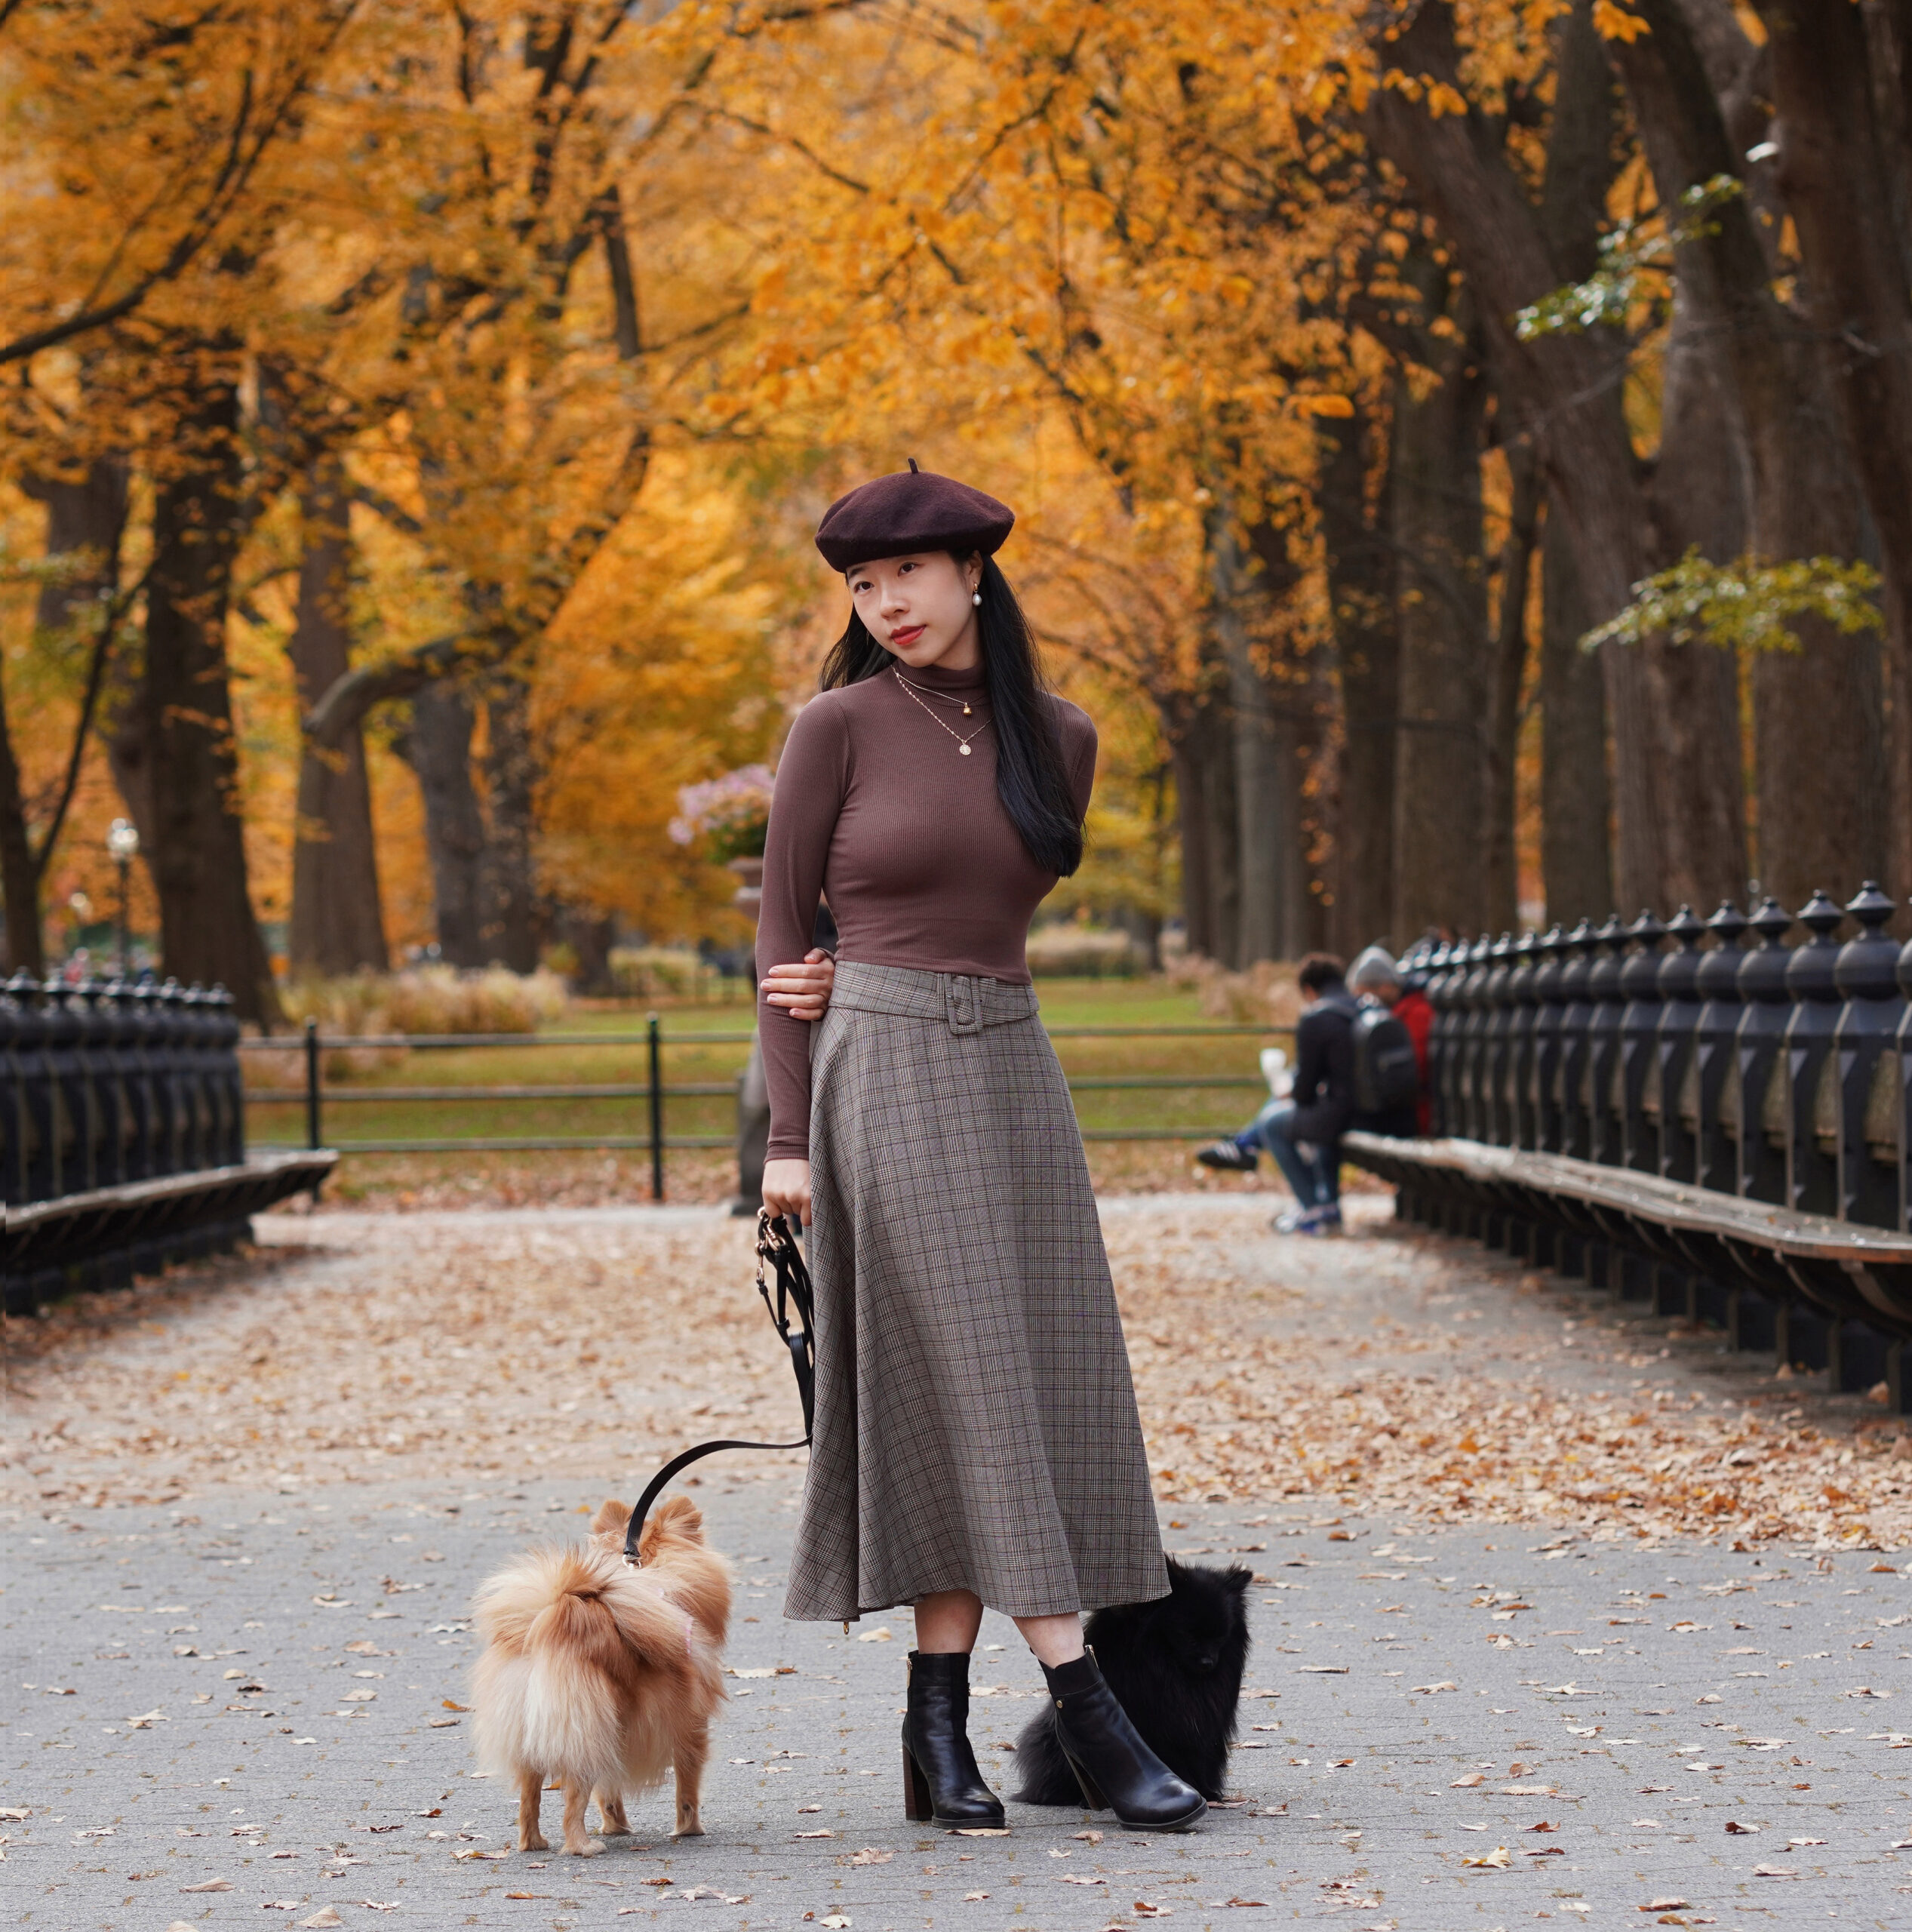 plaid skirt - Vivian R Tang poses in dark academia fashion in Central Park New York City NYC with her pomeranians against a fall setting